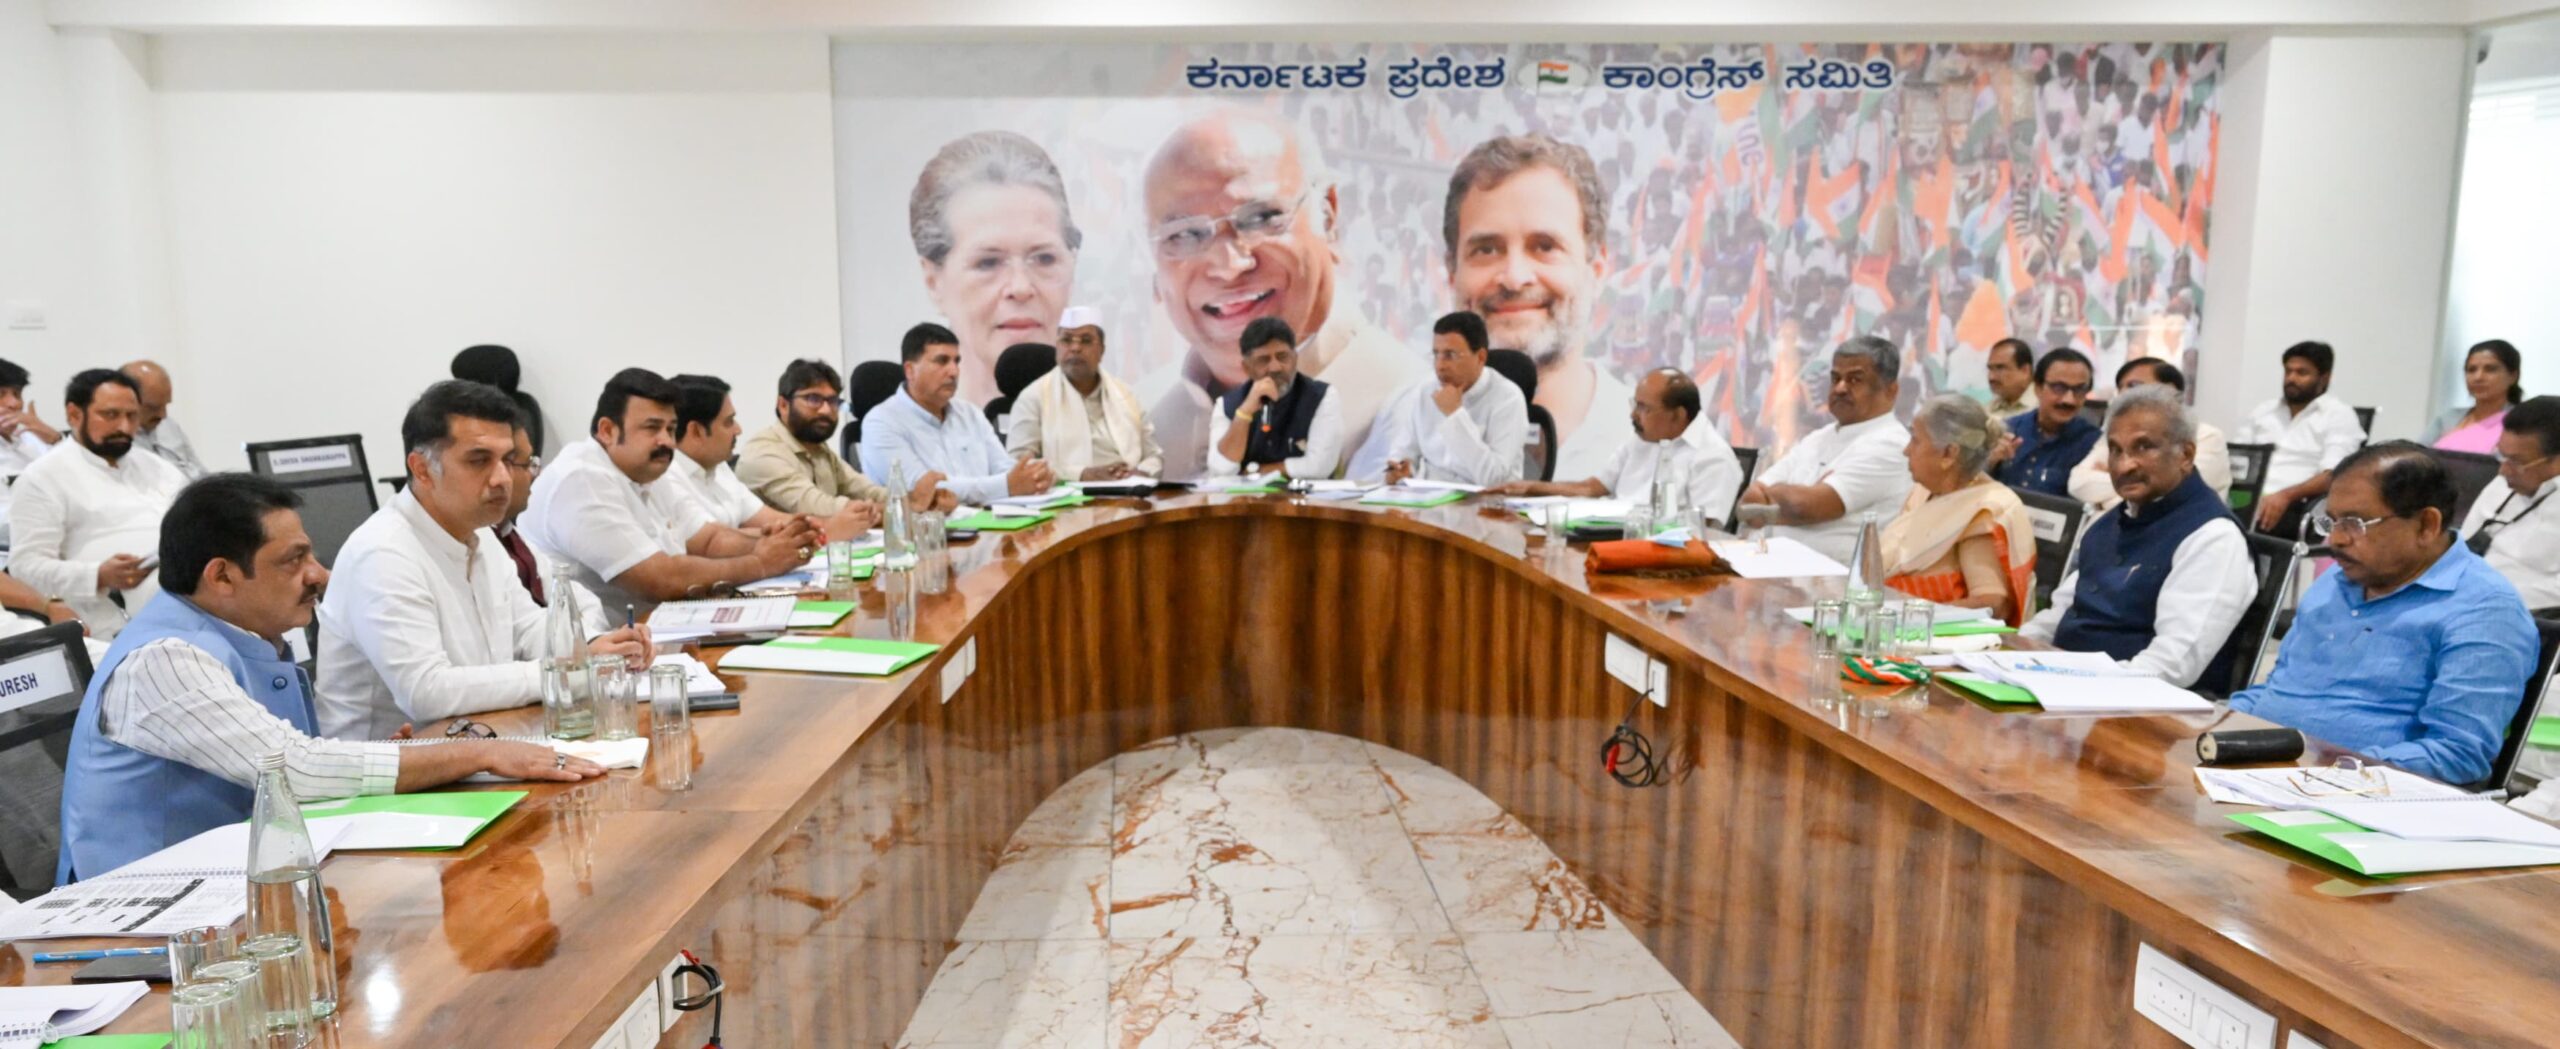 Congress holds the Pradesh Election Committee meeting in Bengaluru on 19 January. (Supplied)